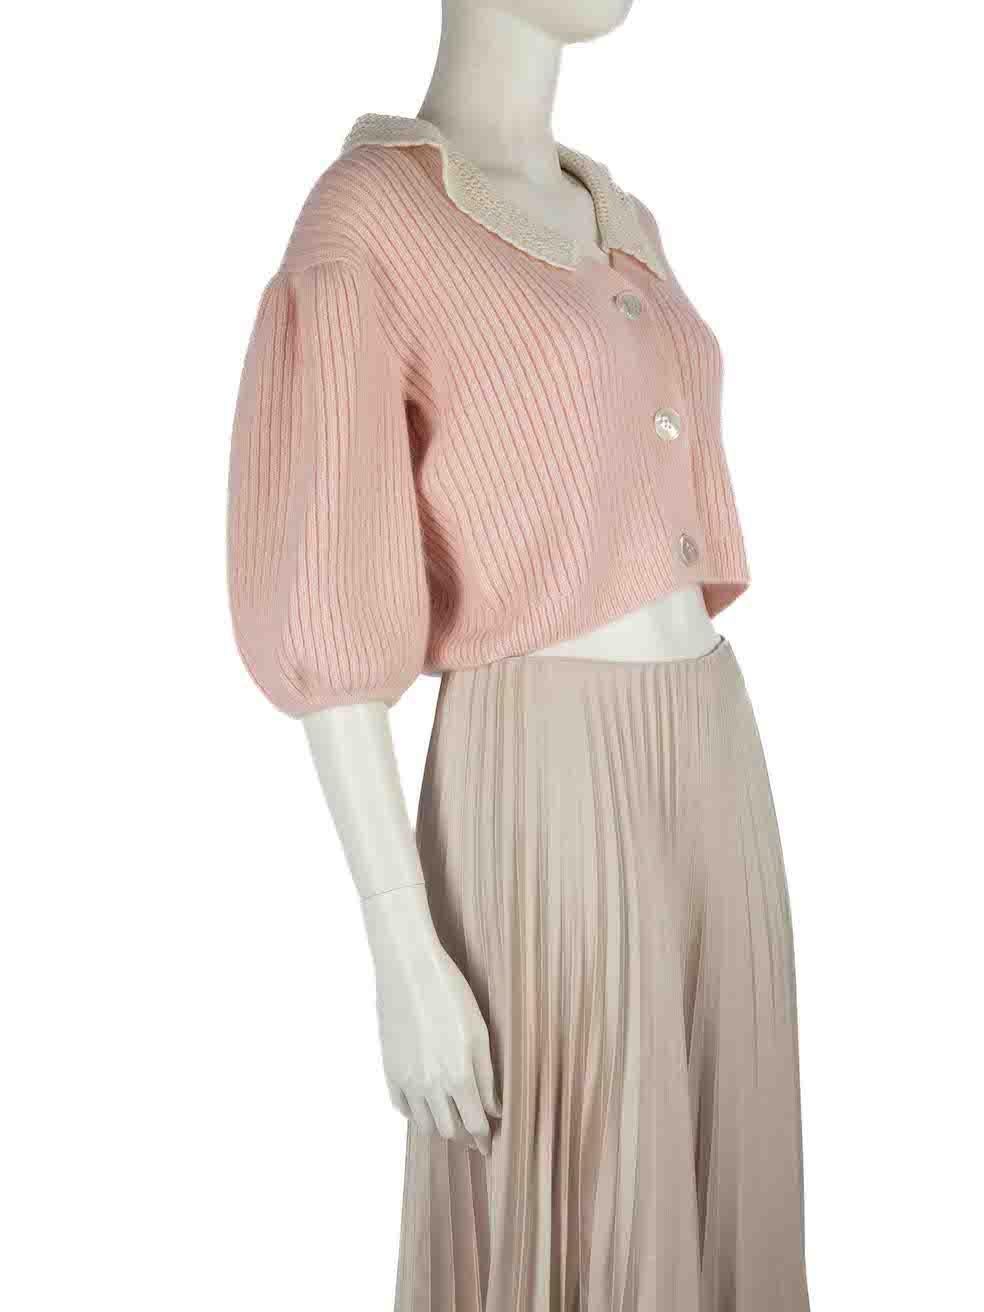 CONDITION is Never worn. No visible wear to cardigan is evident on this new Miu Miu designer resale item.
 
 
 
 Details
 
 
 2021
 
 Pink
 
 Cashmere
 
 Knit cardigan
 
 Cropped fit
 
 Button up fastening
 
 Long sleeves
 
 Crochet contrast collar
